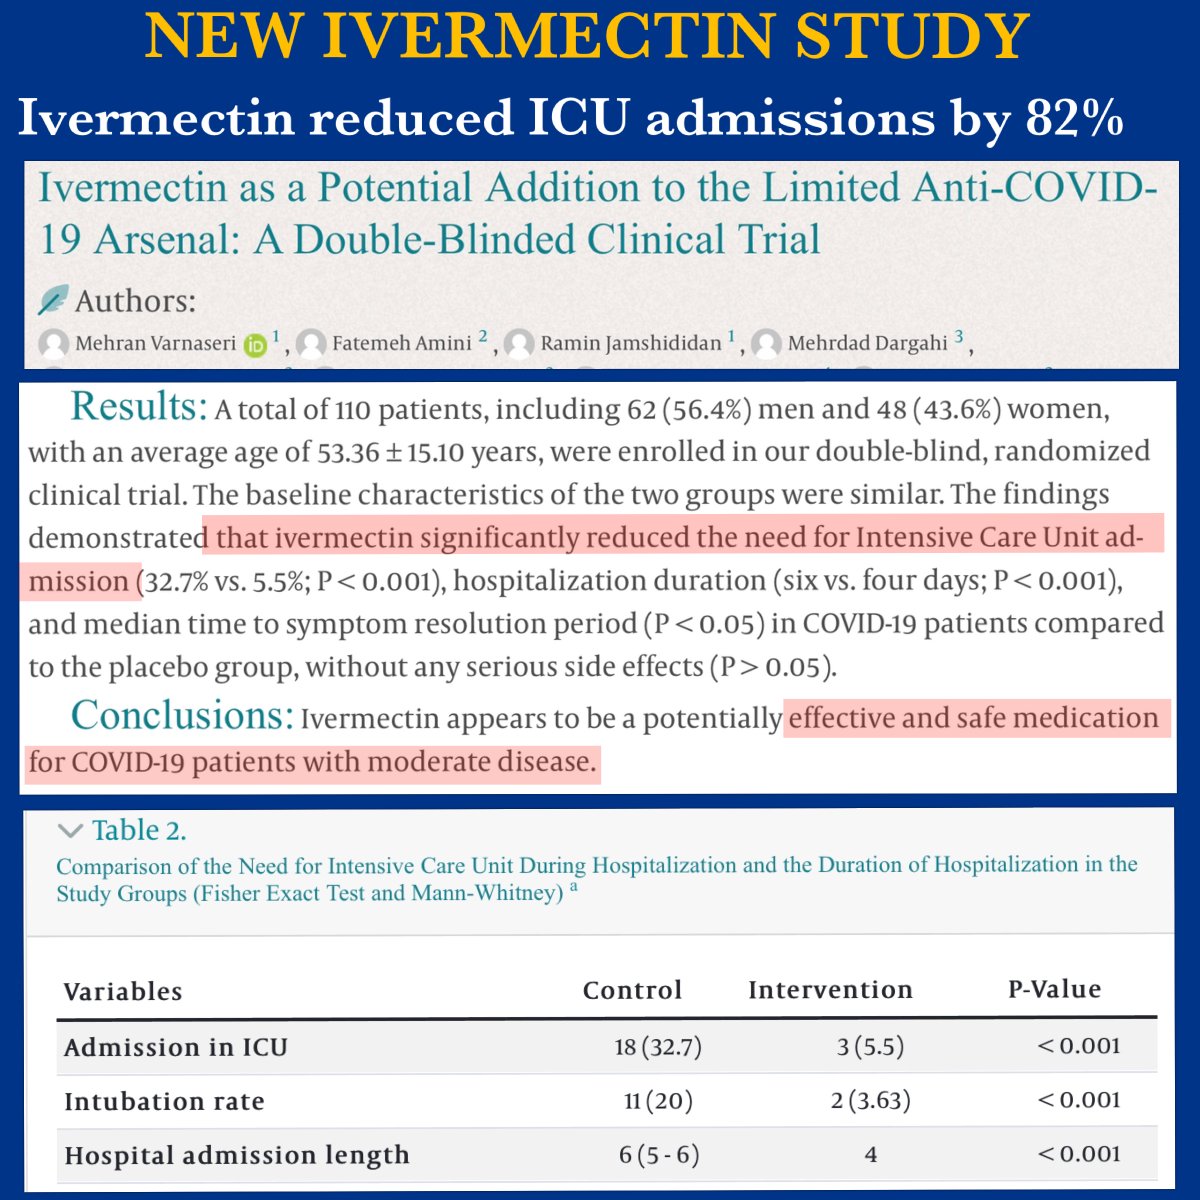 AND ANOTHER : New Study, Ivermectin works again.

Double-blind randomised controlled study finds Ivermectin reduced ICU admissions by 83% (P <0.001)

Its time that those involved in denying sick and/or dying covid patients access to Ivermectin were arrested and charged with…